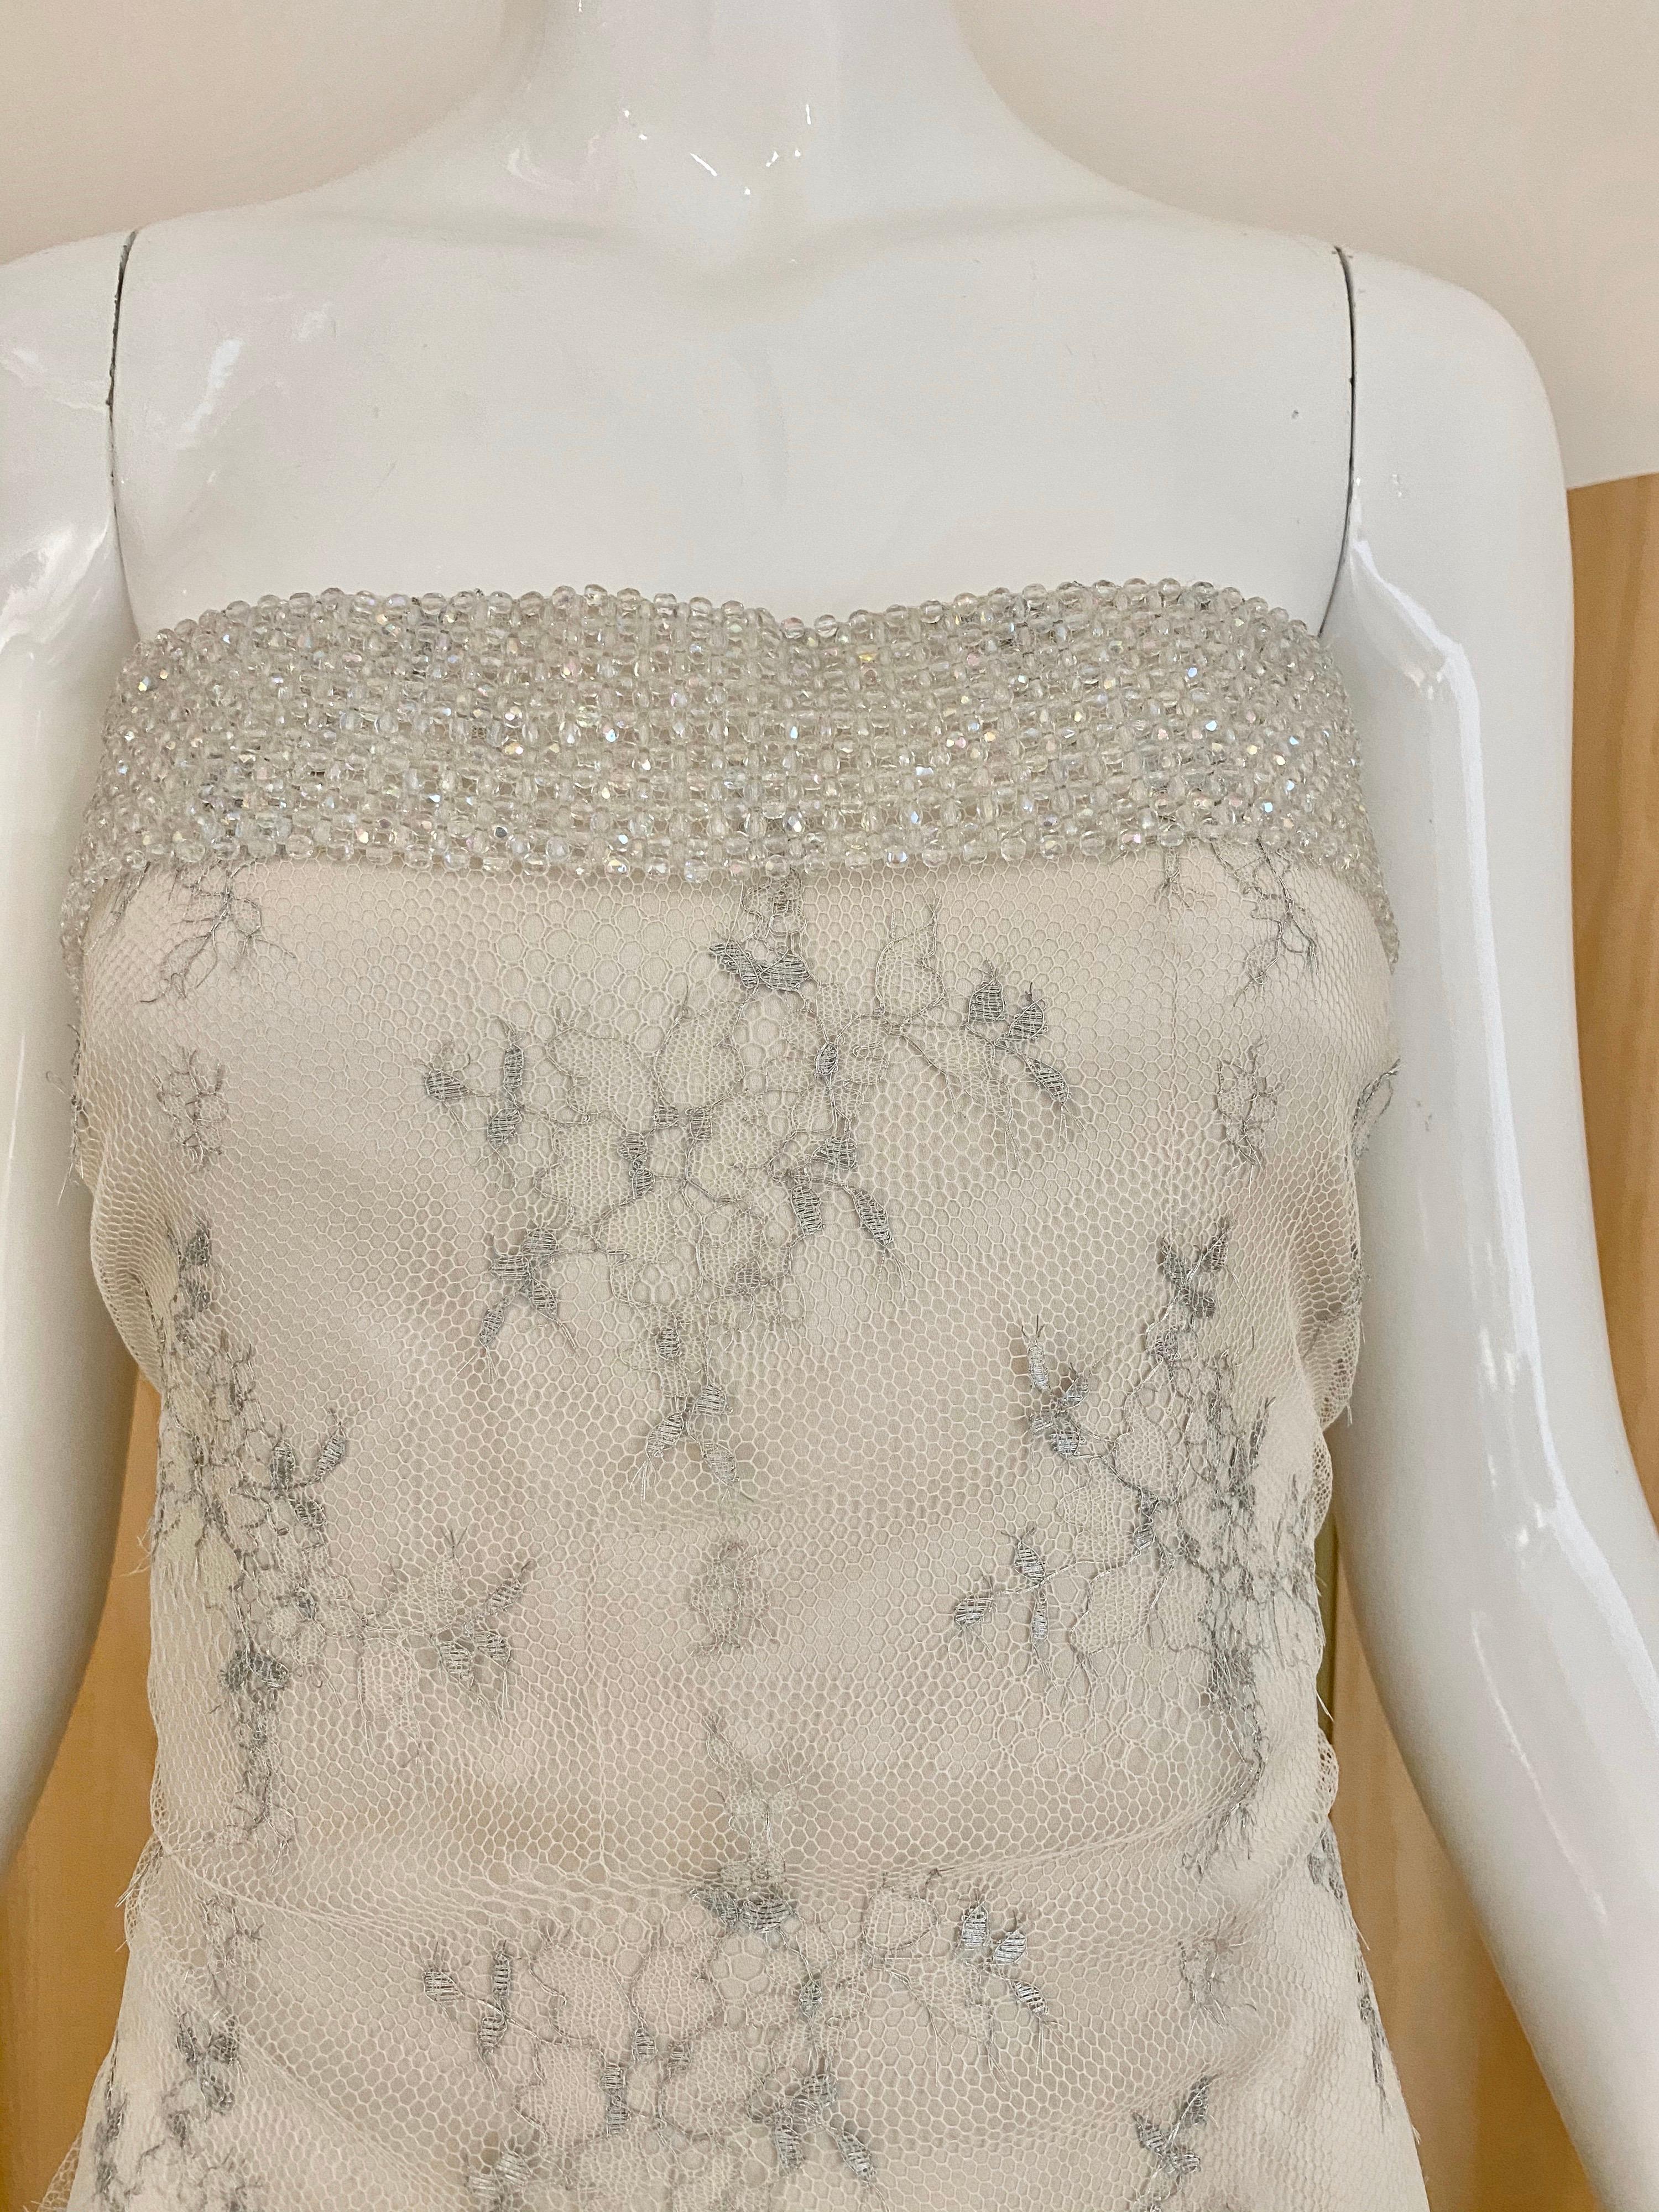 Beautiful Giorgio Armani Strapless white and silver lace gown with iridescent beads.
Lace has beautiful silver grey embroidery. Perfect for wedding or rehearsal dinner .
Fit size : Medium
Bust: 40”/ Waist: 36” / Hip: 38”/ Dress: Length: 54”